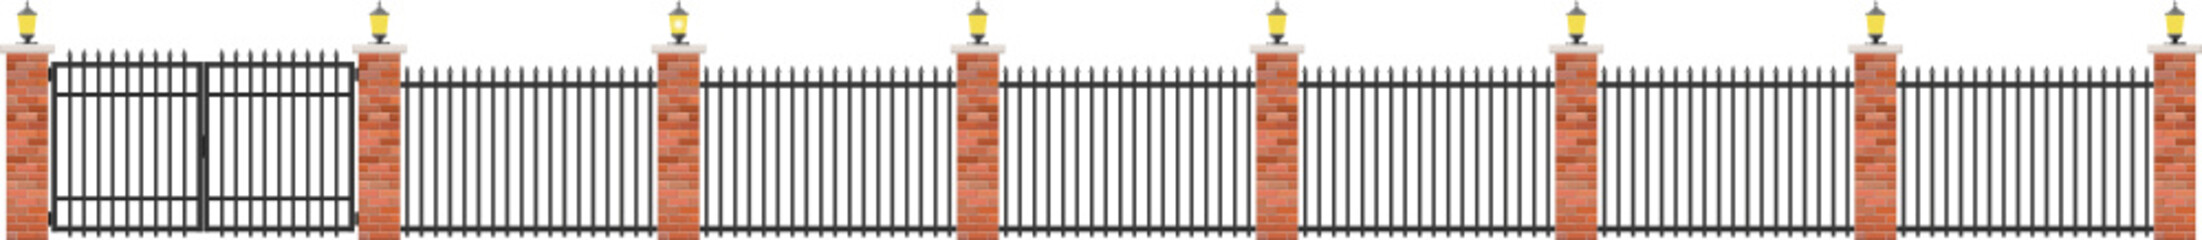 Realistic brick and steel fence 